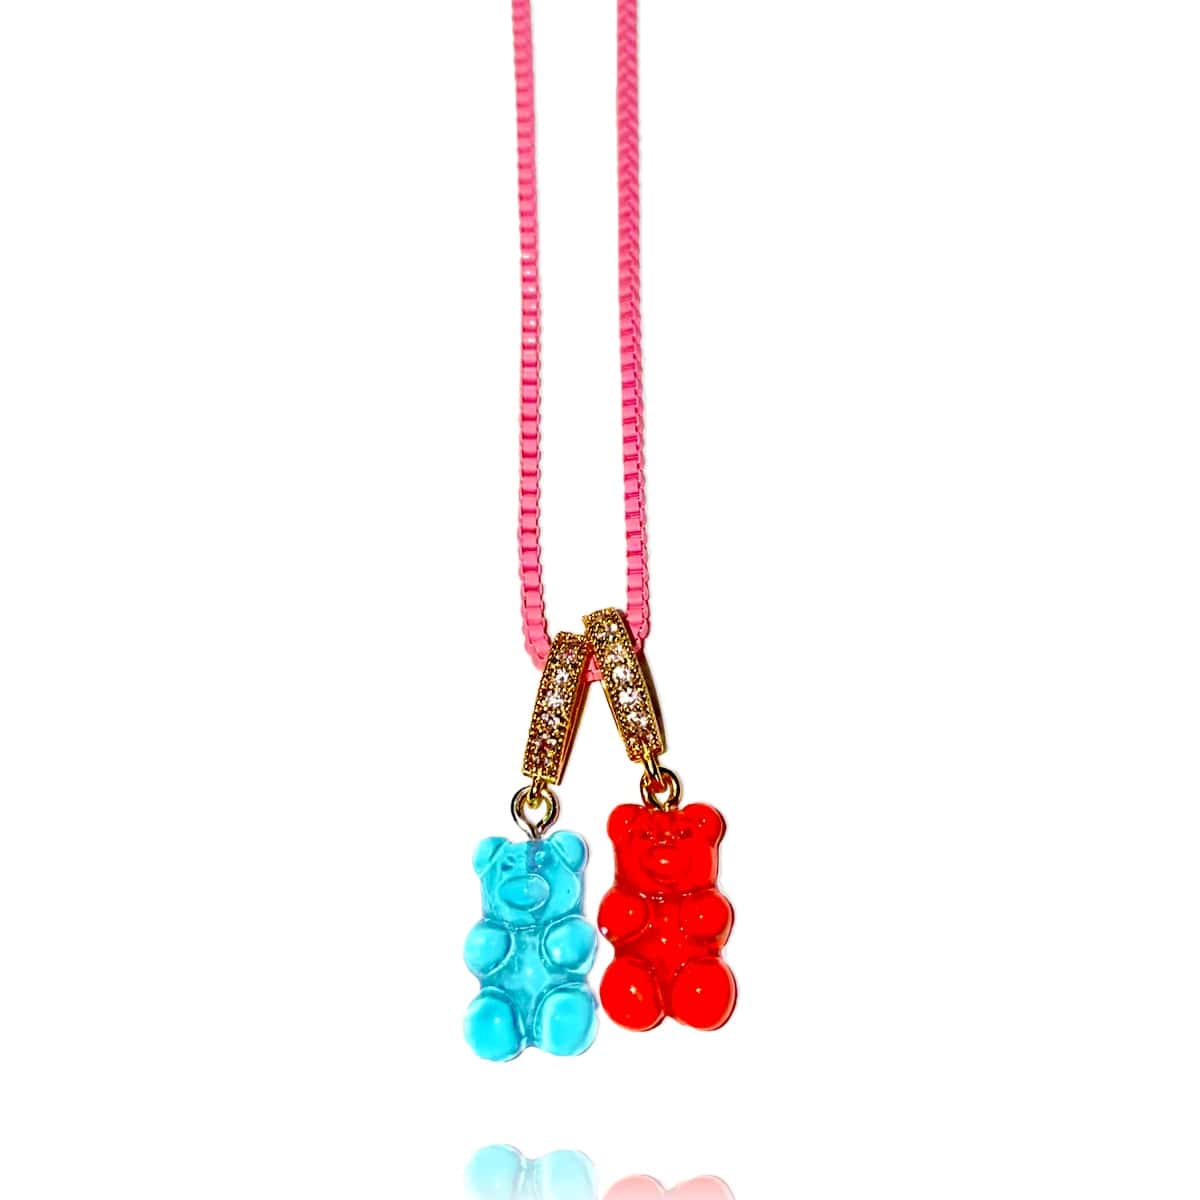 Cherries & Berries Mixed Double Bear Necklace - Gummy Bear Bling